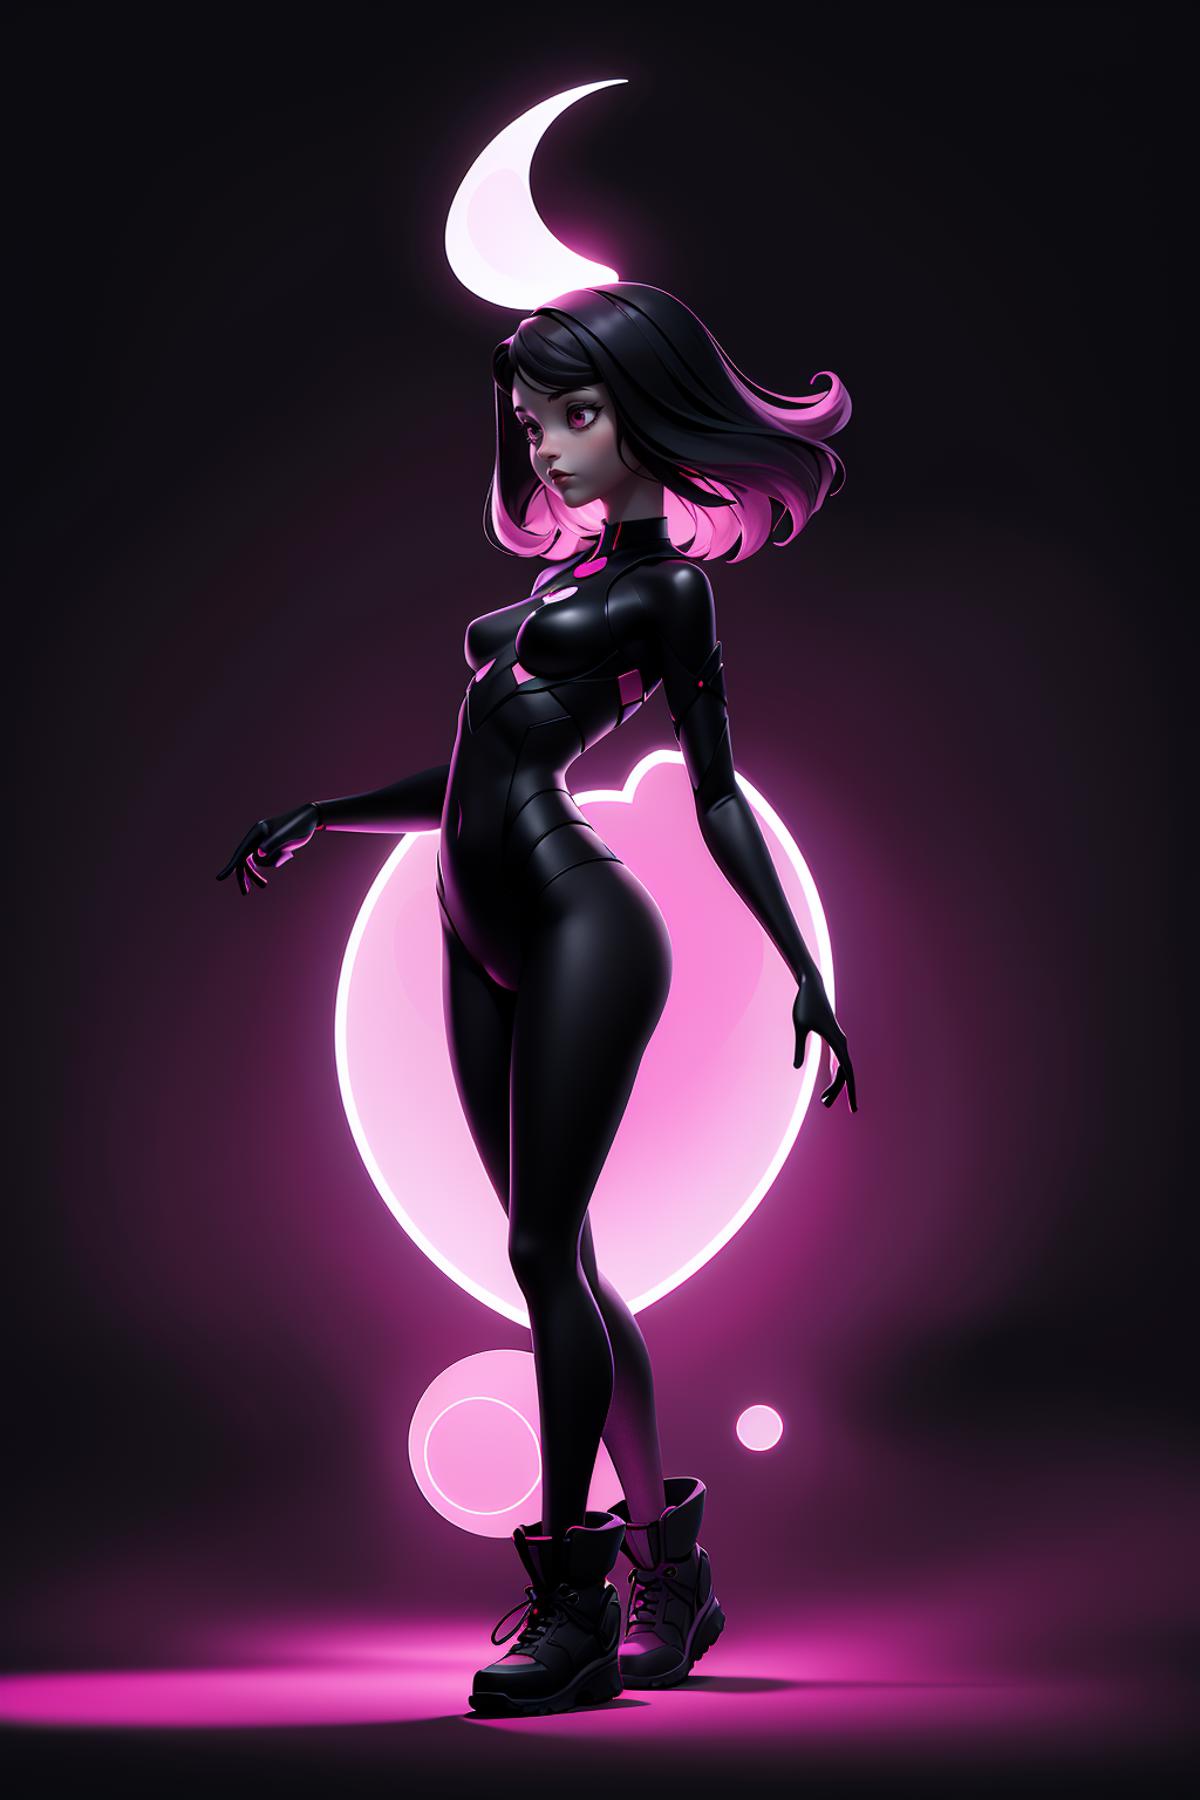 A Superhero Cartoon Image of a Woman in a Black Costume Posing in Front of a Pink Circle